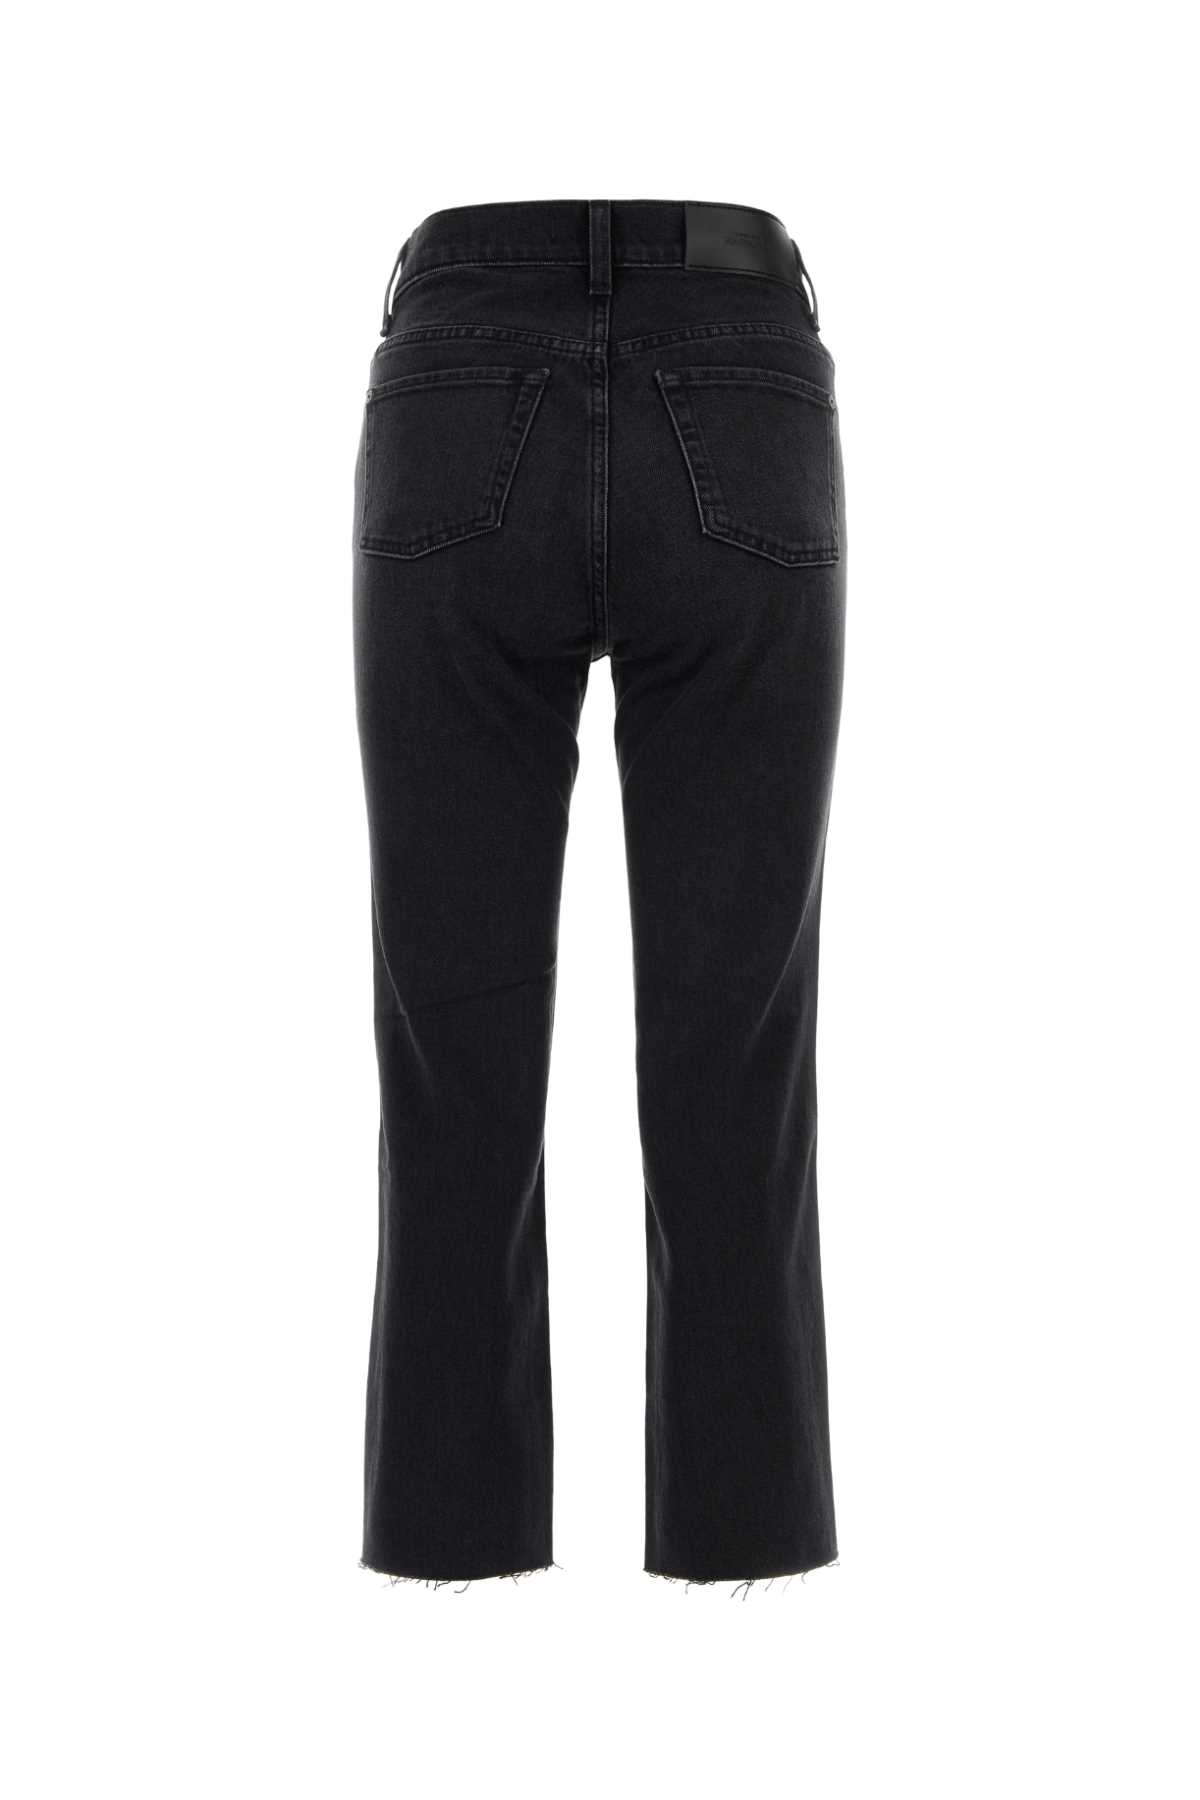 7 FOR ALL MANKIND BLACK STRETCH DENIM LOGAN STOVEPIPE JEANS